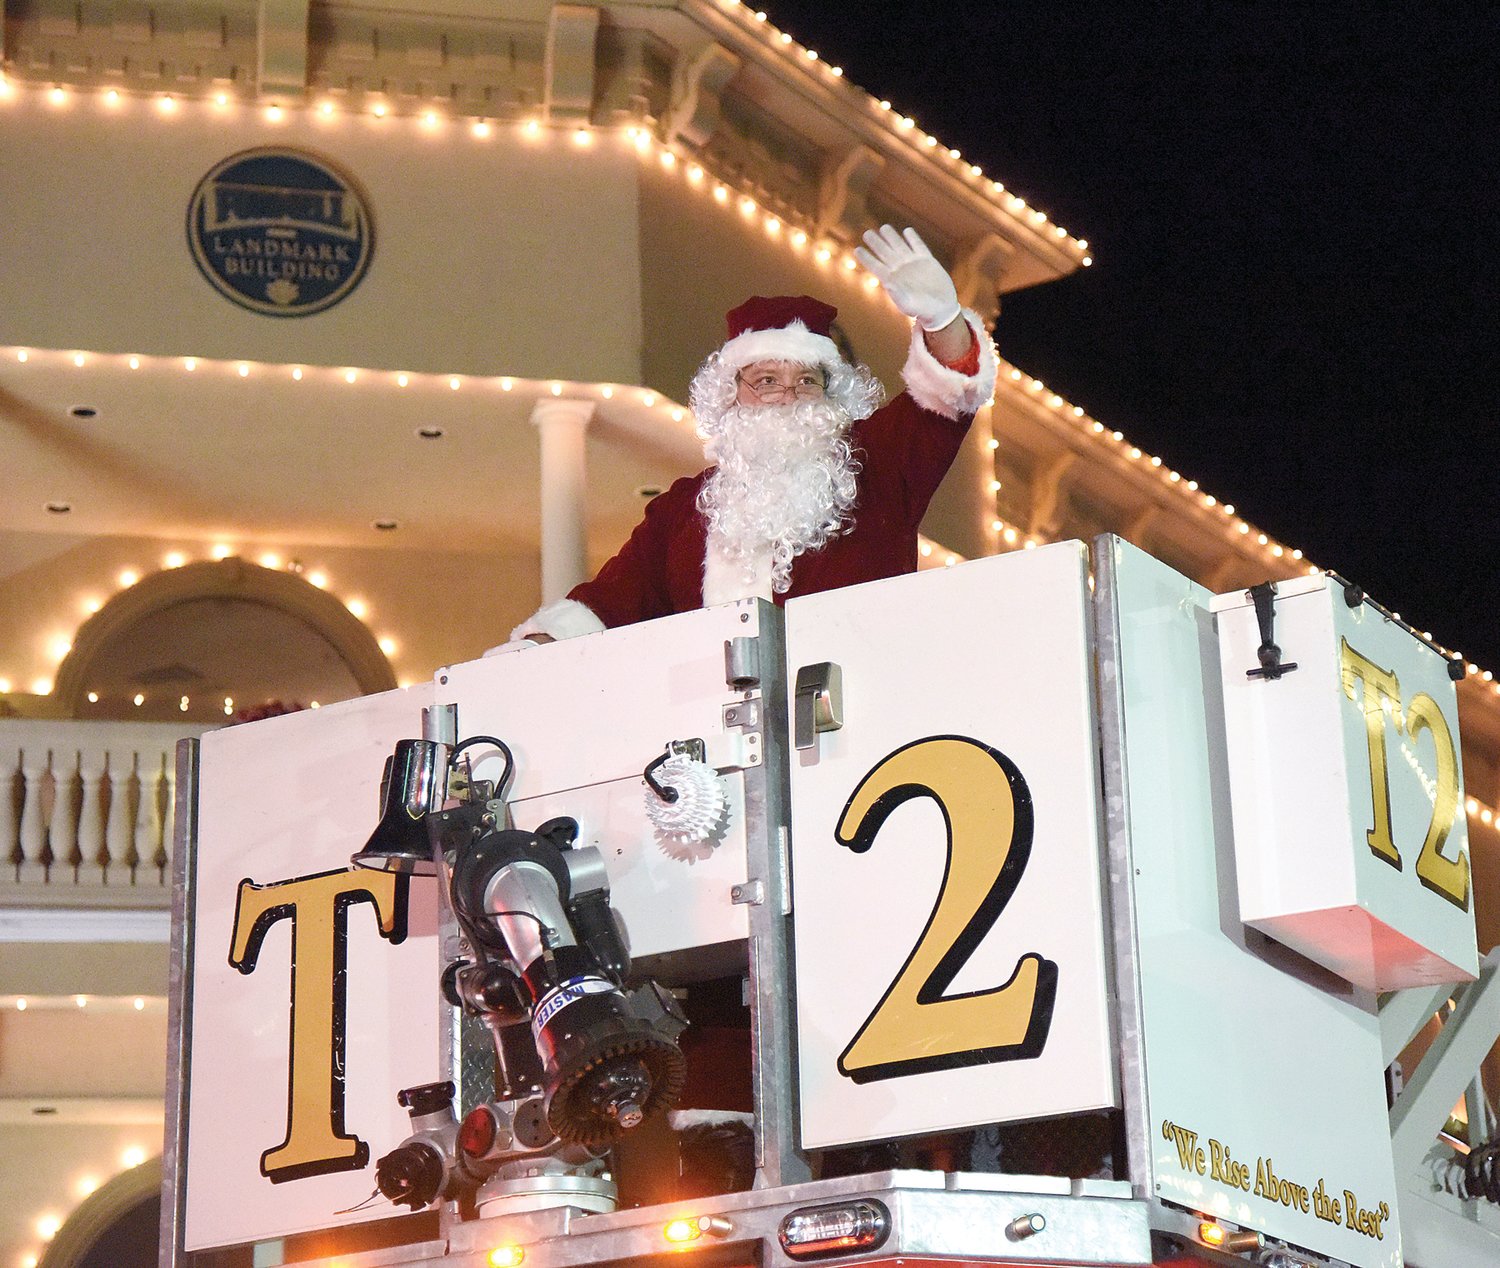 Santa waves Saturday night atop the Sedalia Fire Department truck during the Sedalia Area Chamber of Commerce 2021Christmas Parade. Thousands turned out for the annual parade lining the streets downtown. The theme this year was “Christmas at the Movies.”